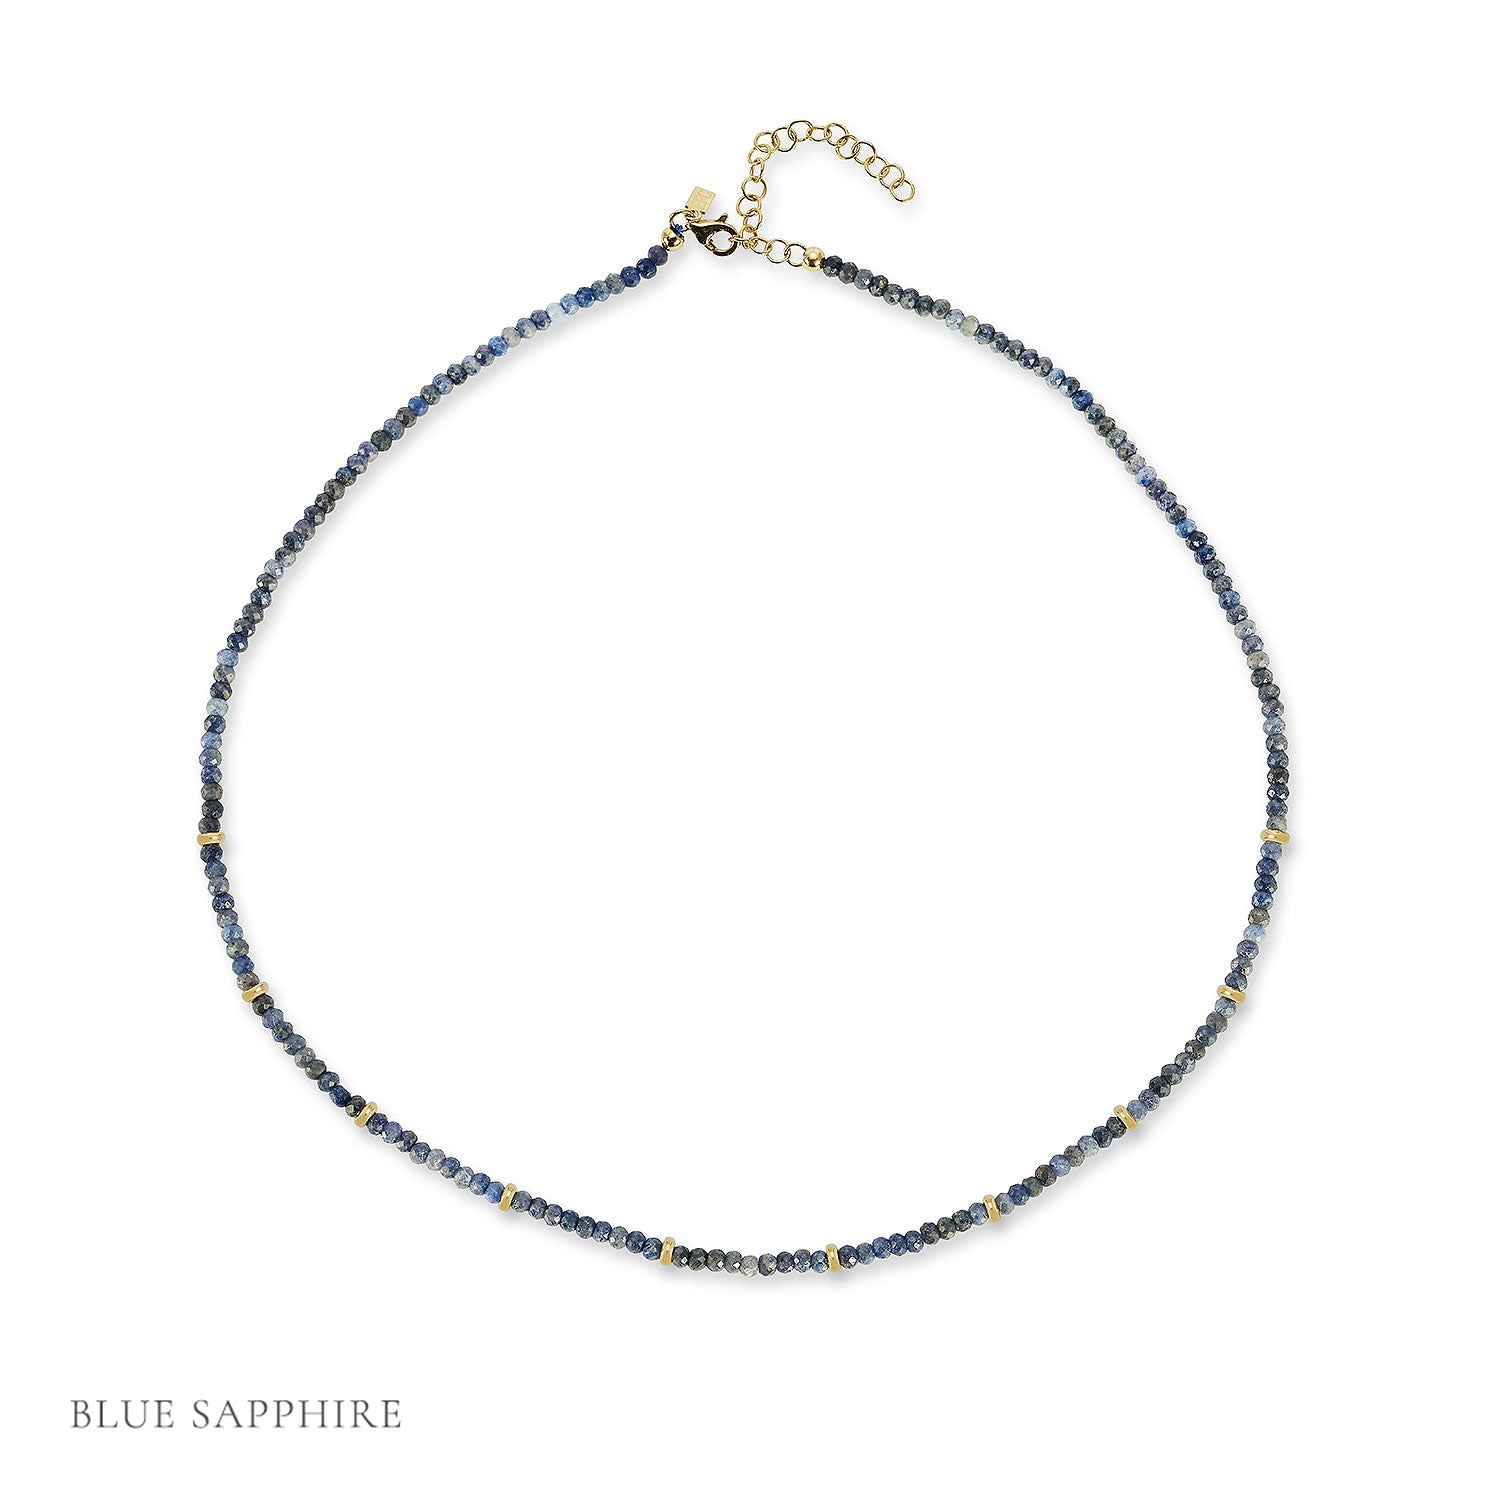 Birthstone Bead Necklace In Blue Sapphire | 14k Gold | EF Collection ...